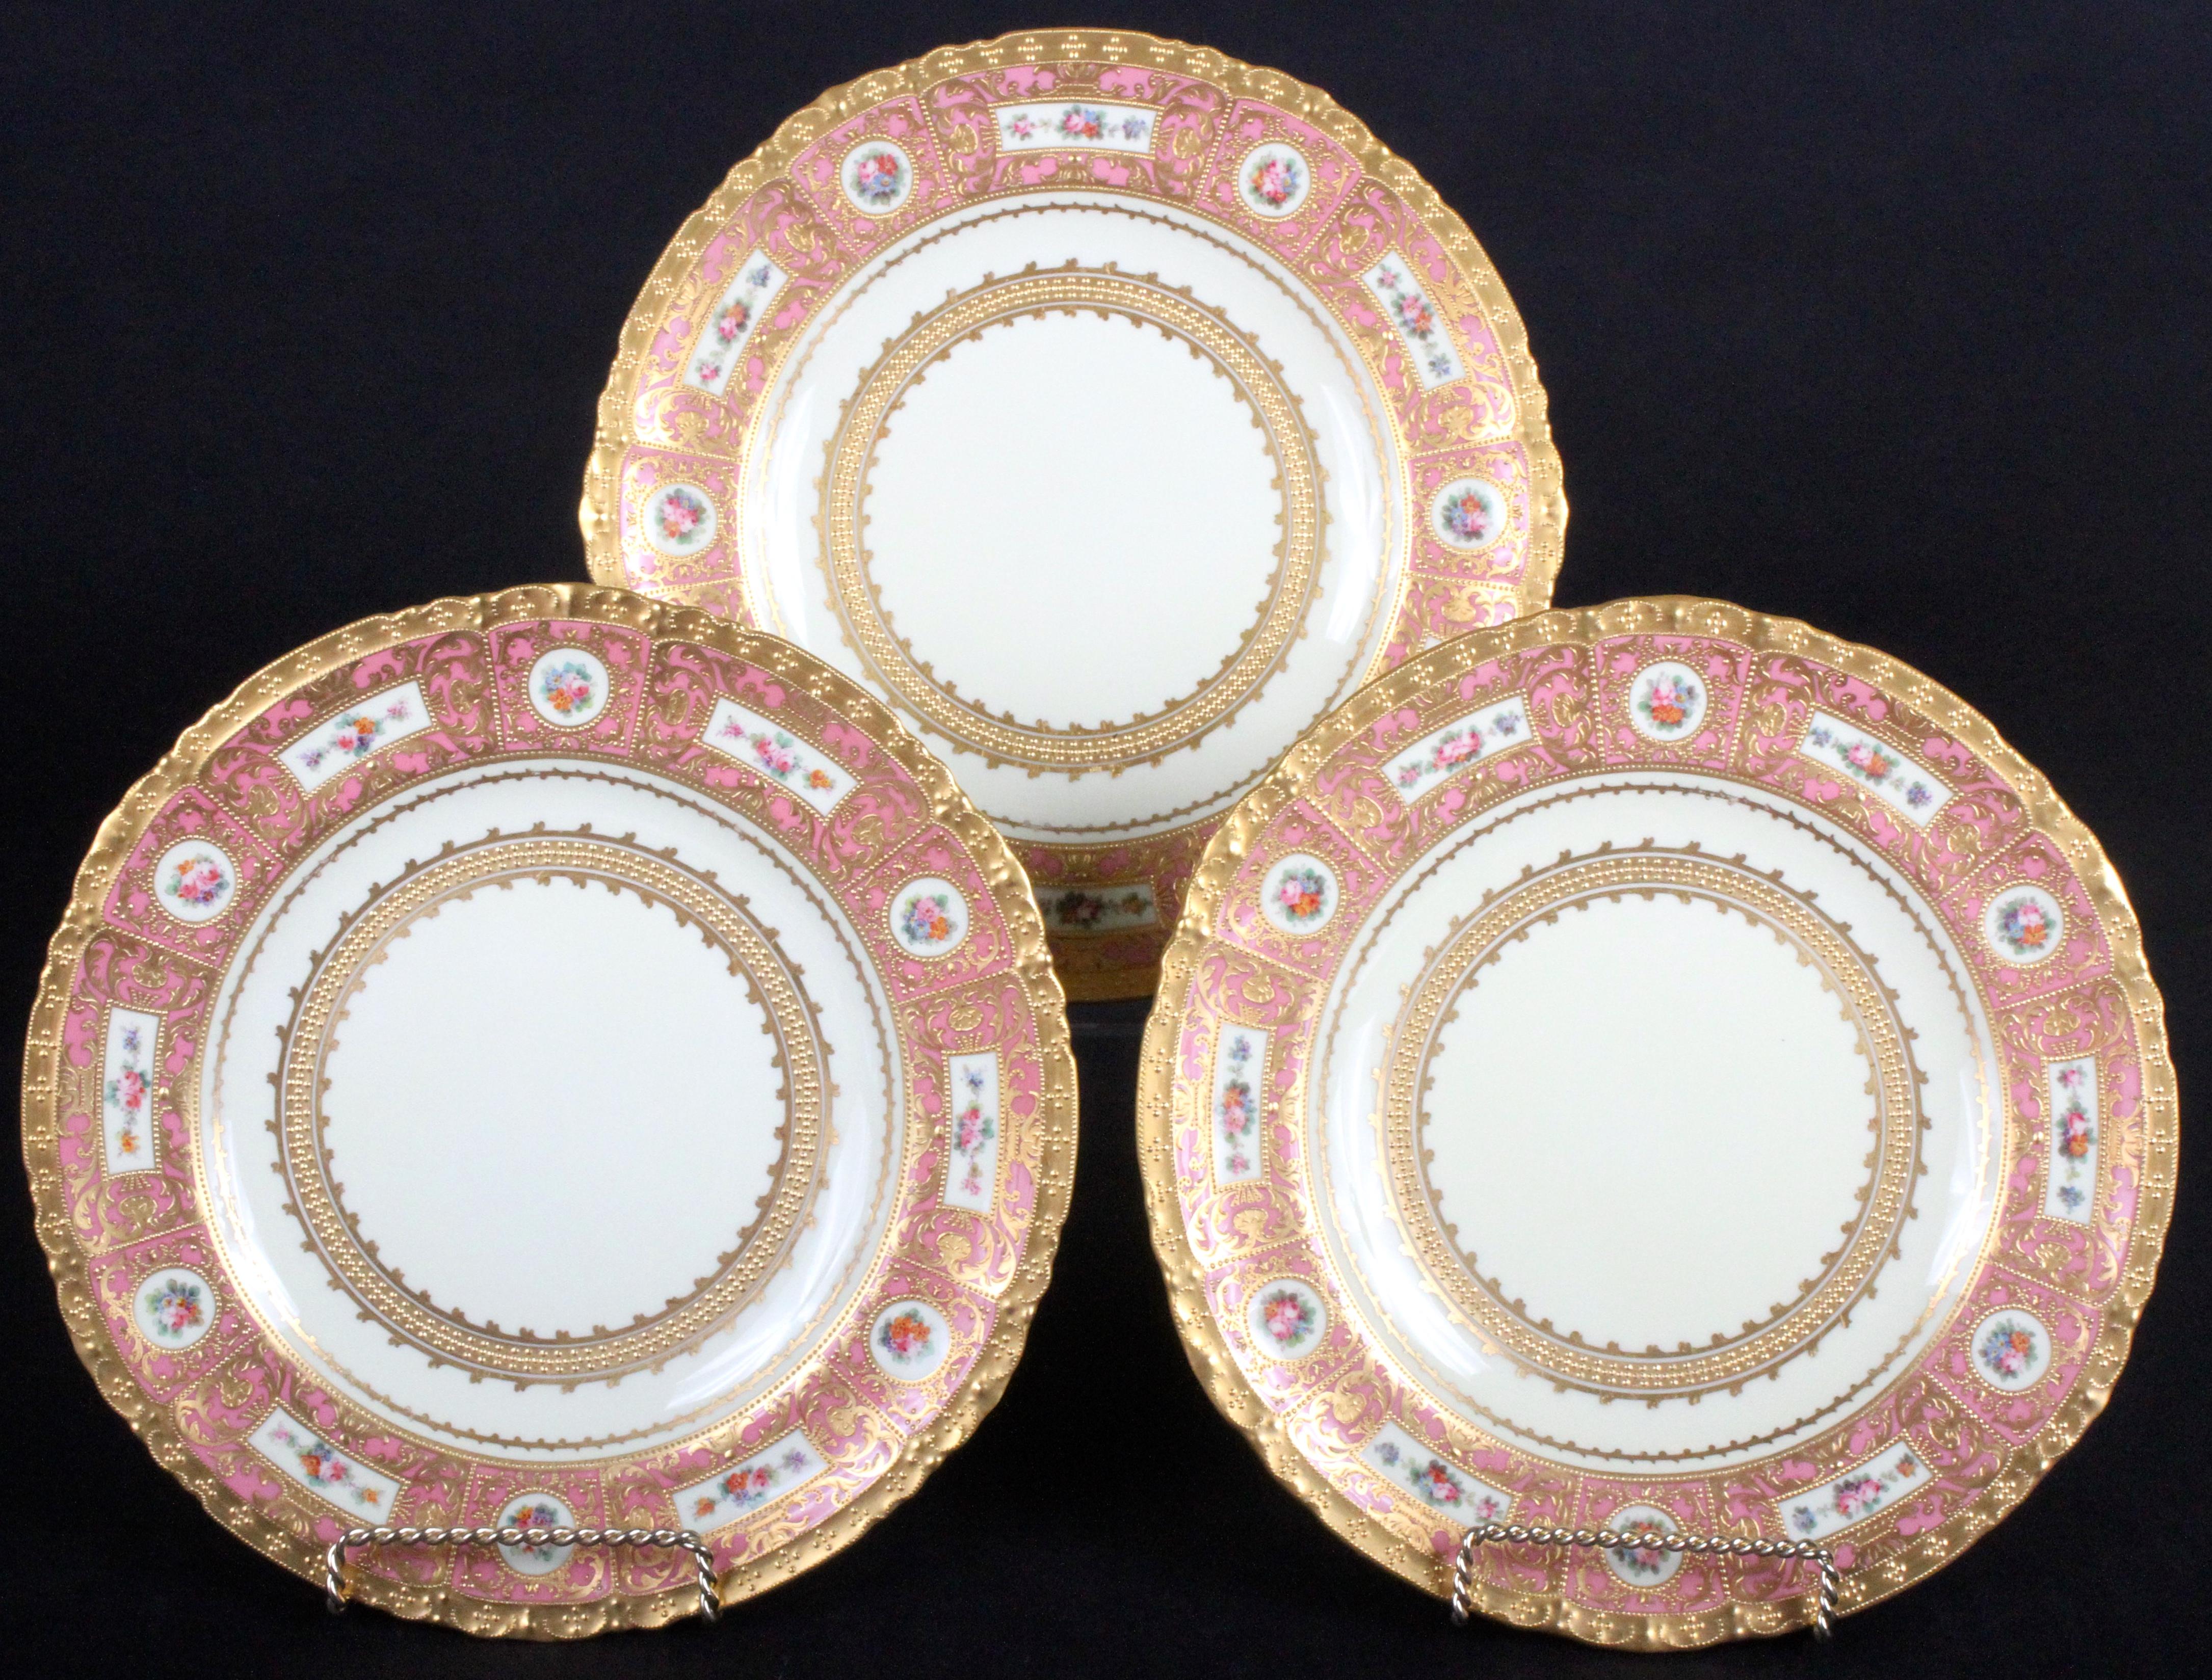 These 15 ornate service or dinner plates are from the esteemed Royal Crown Derby firm of Derby, England. The plate rim is divided into 6 rectangular panels that feature hand painted groups of flowers, the rectangular panels are separated by 6